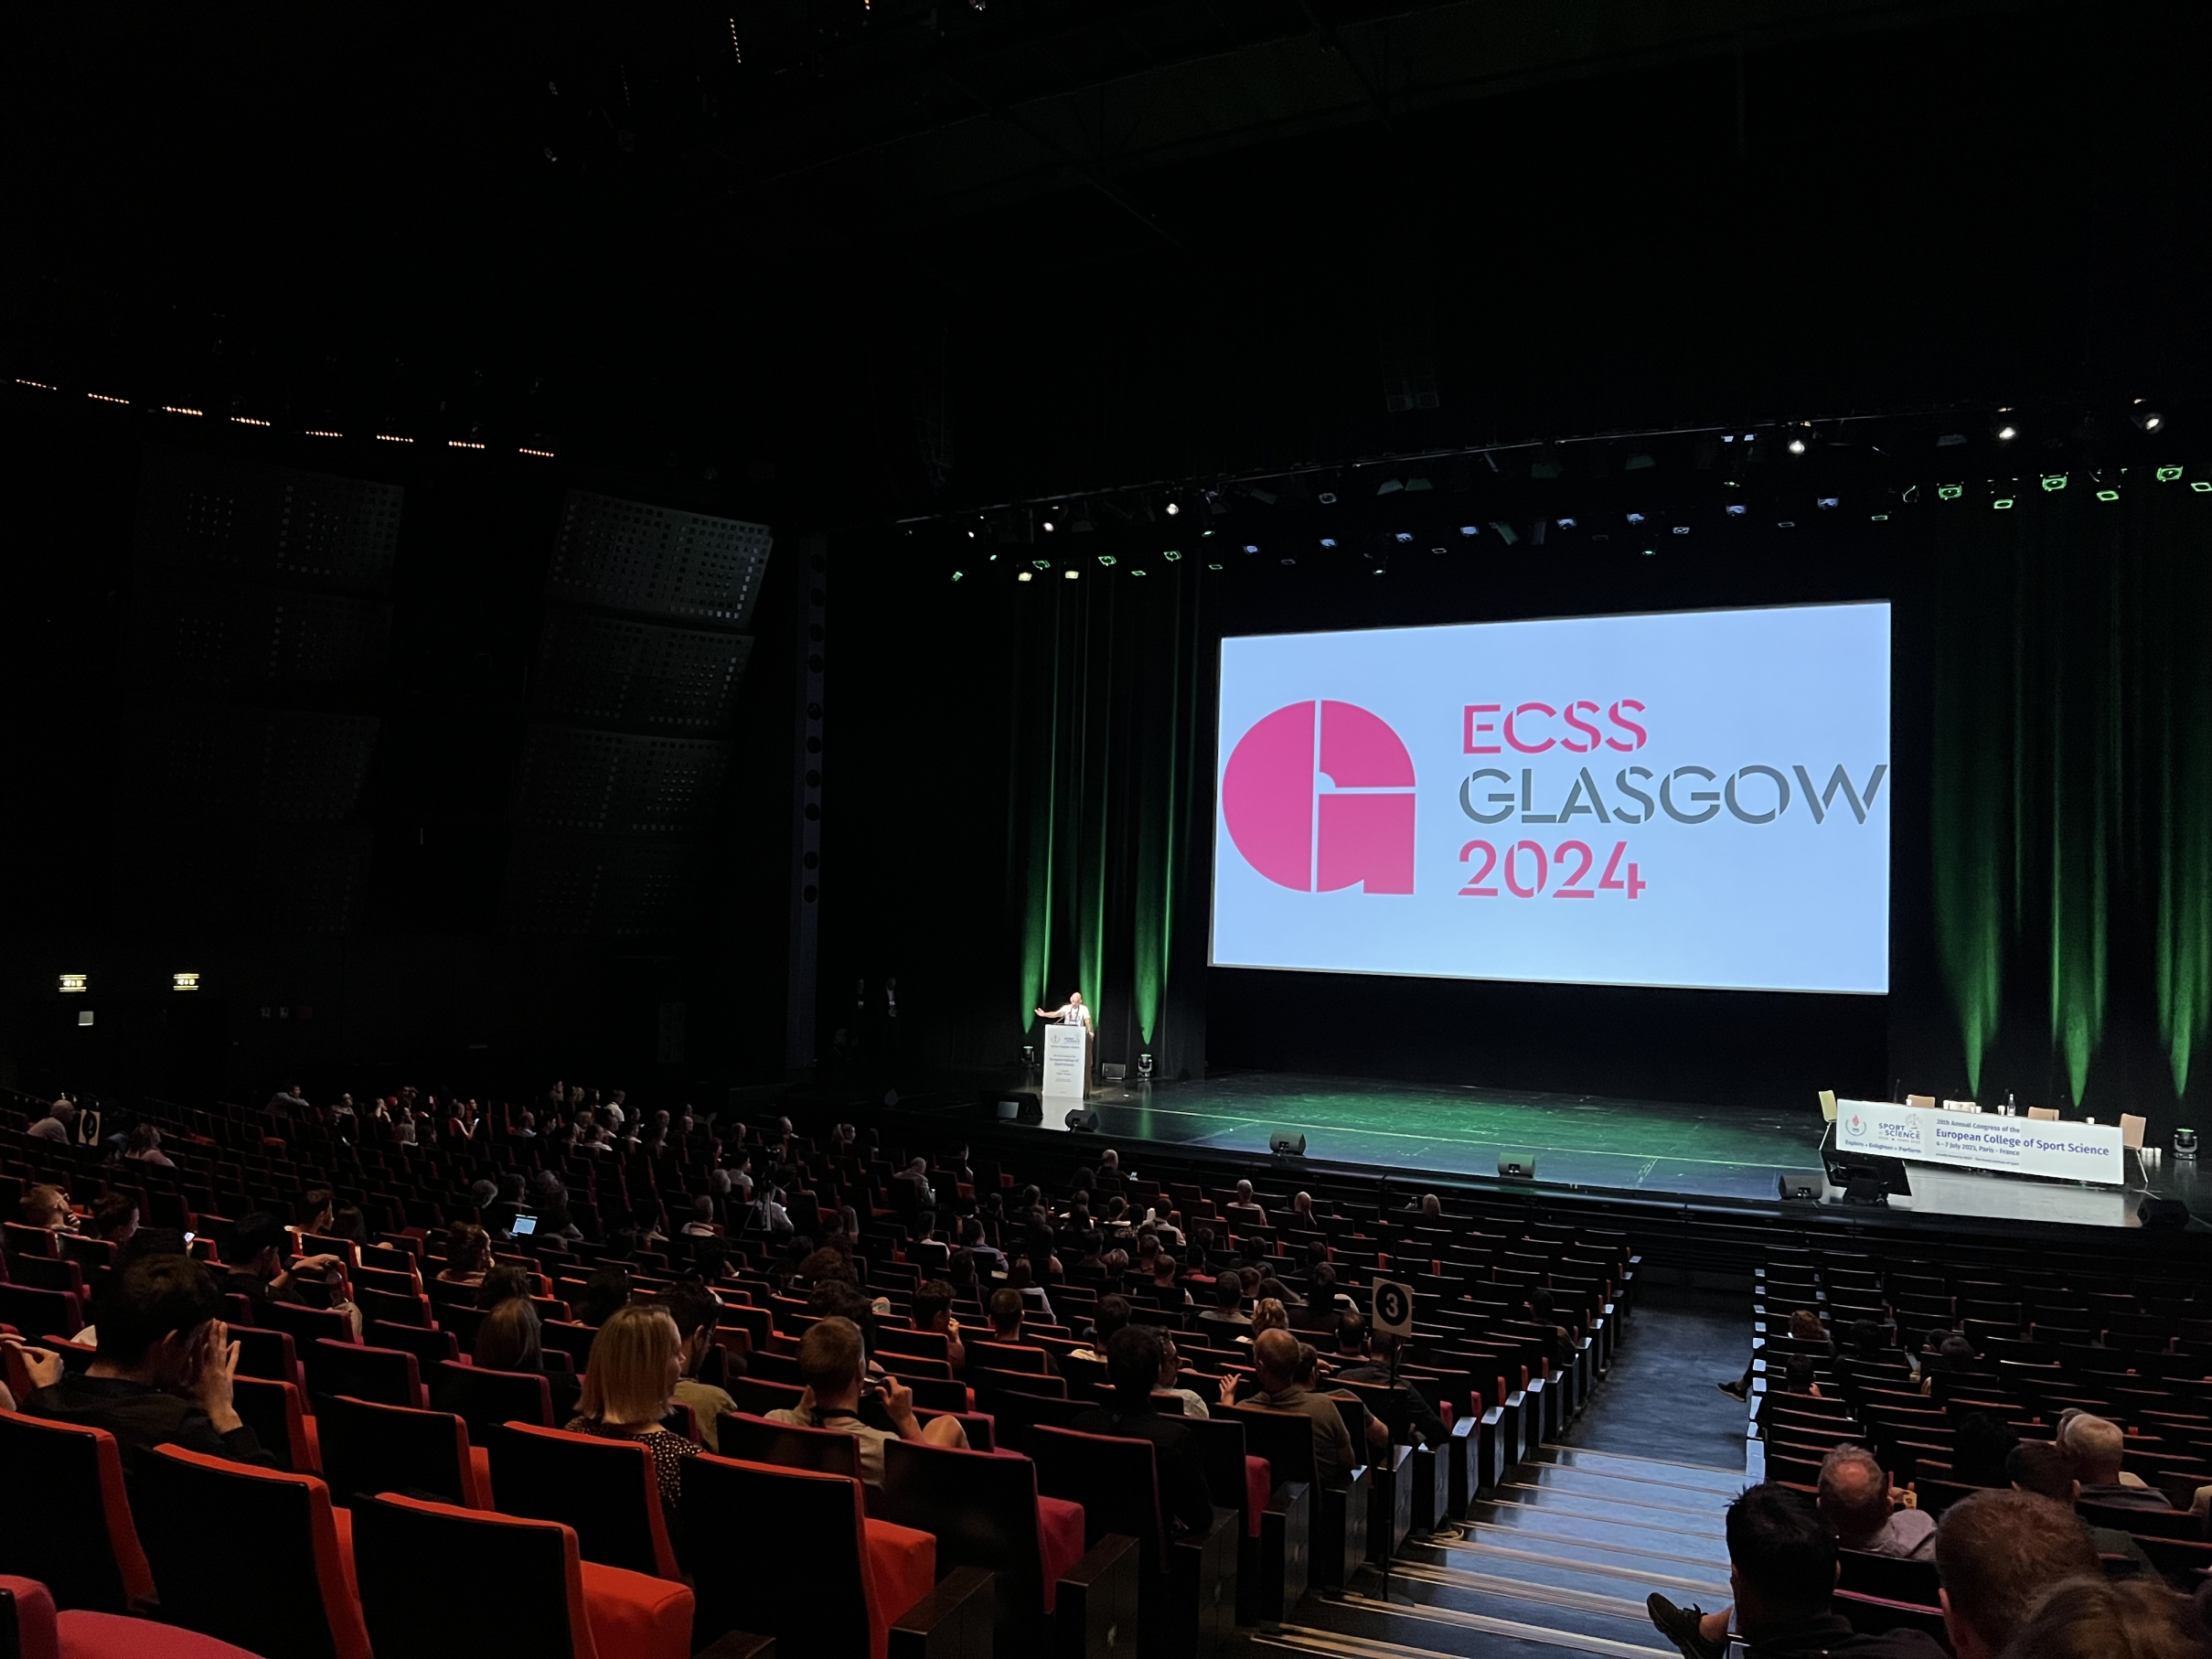 See you in Glasgow for the ECSS 2024